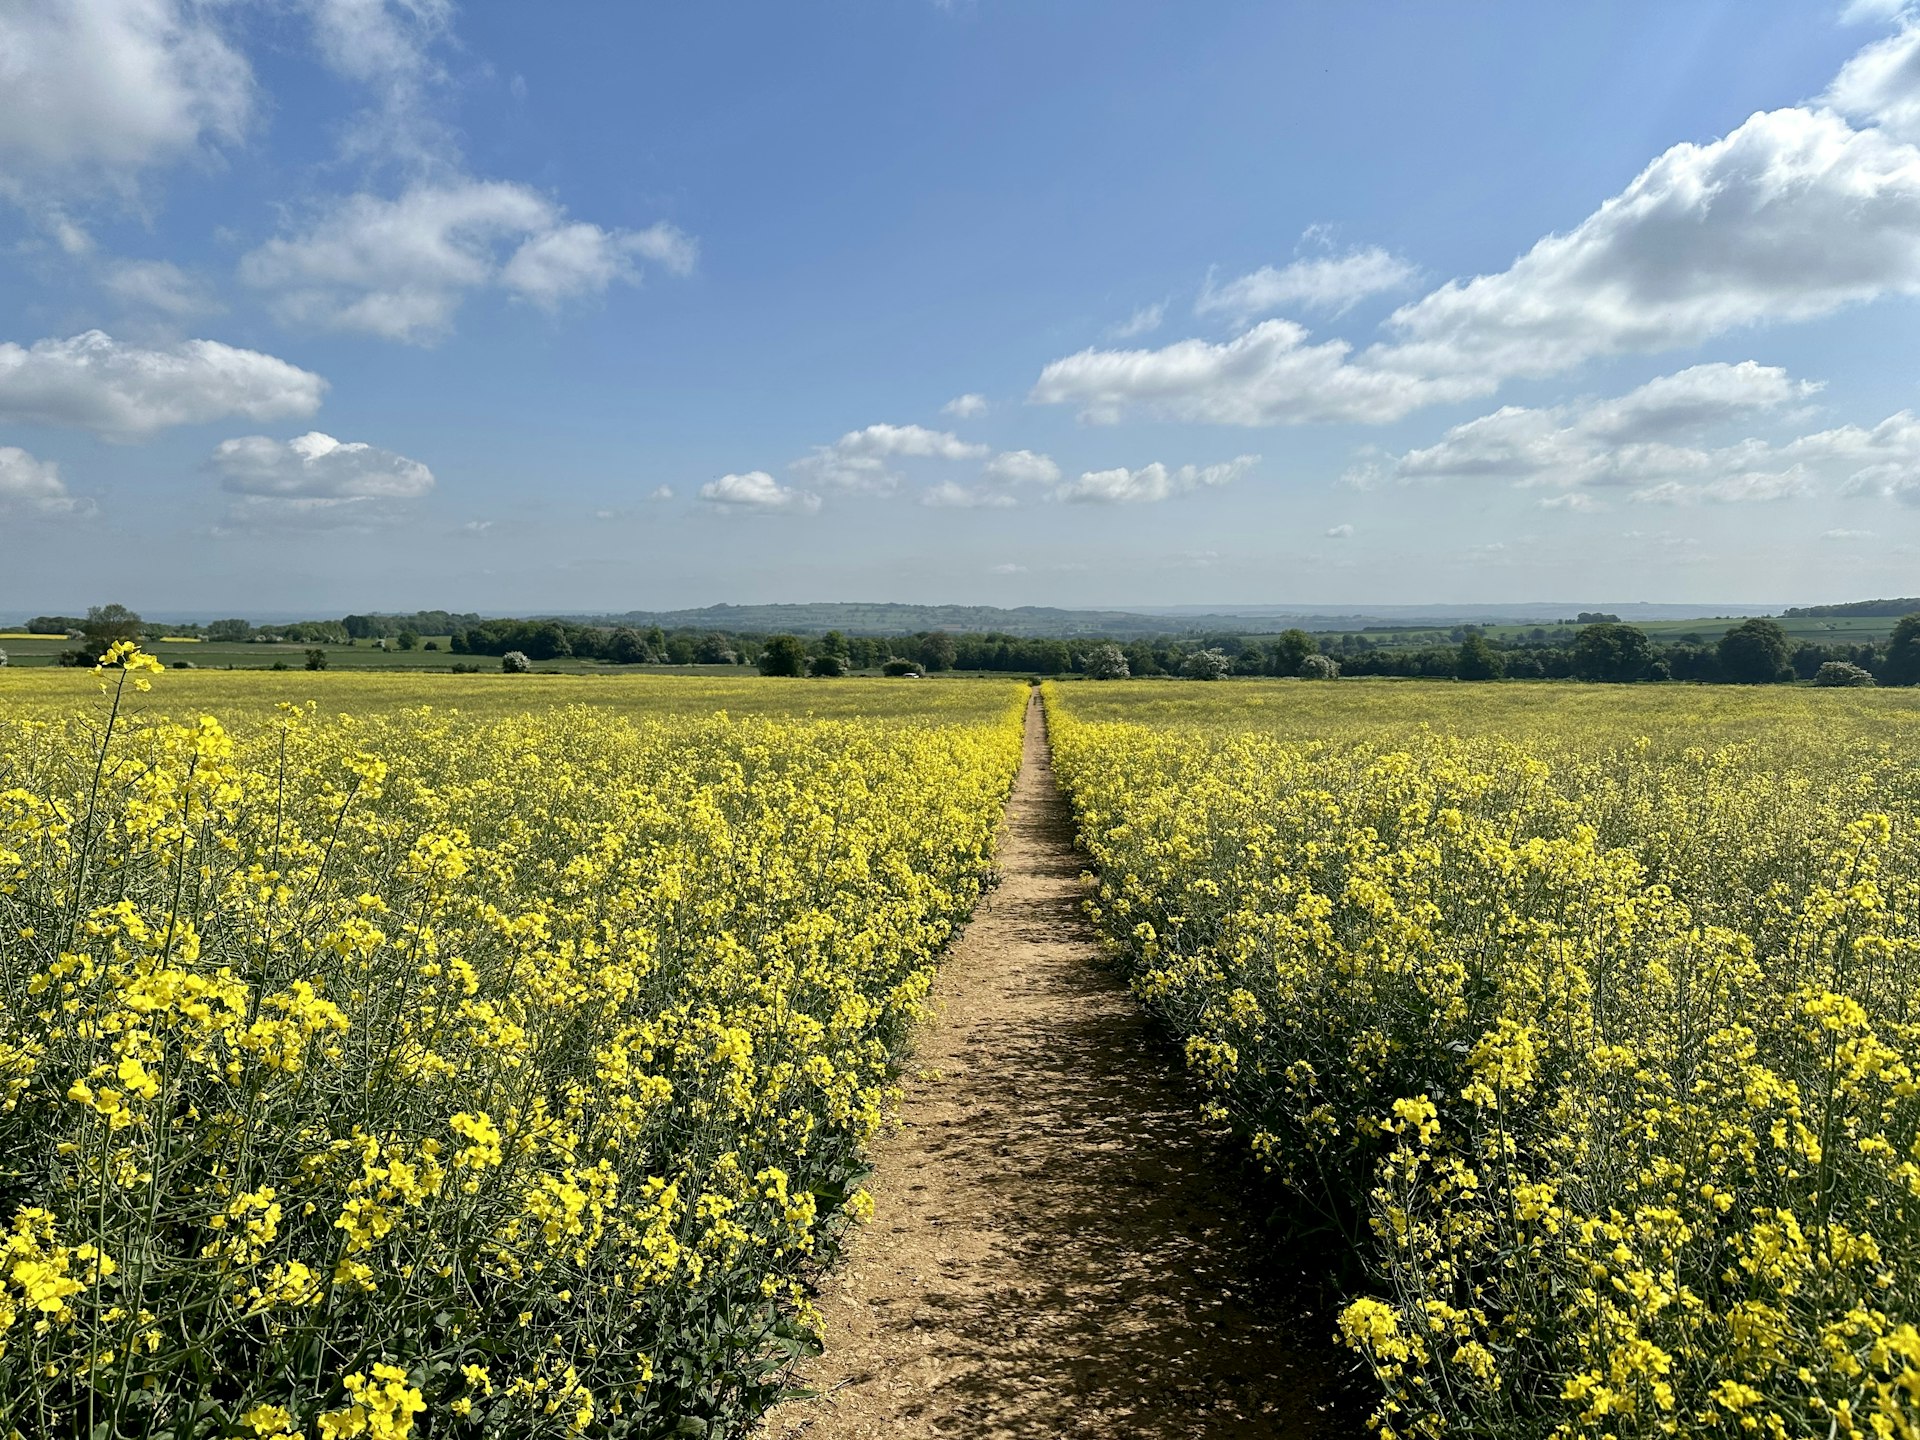 Flowering rapeseed in a field along the Cotswold Way, England